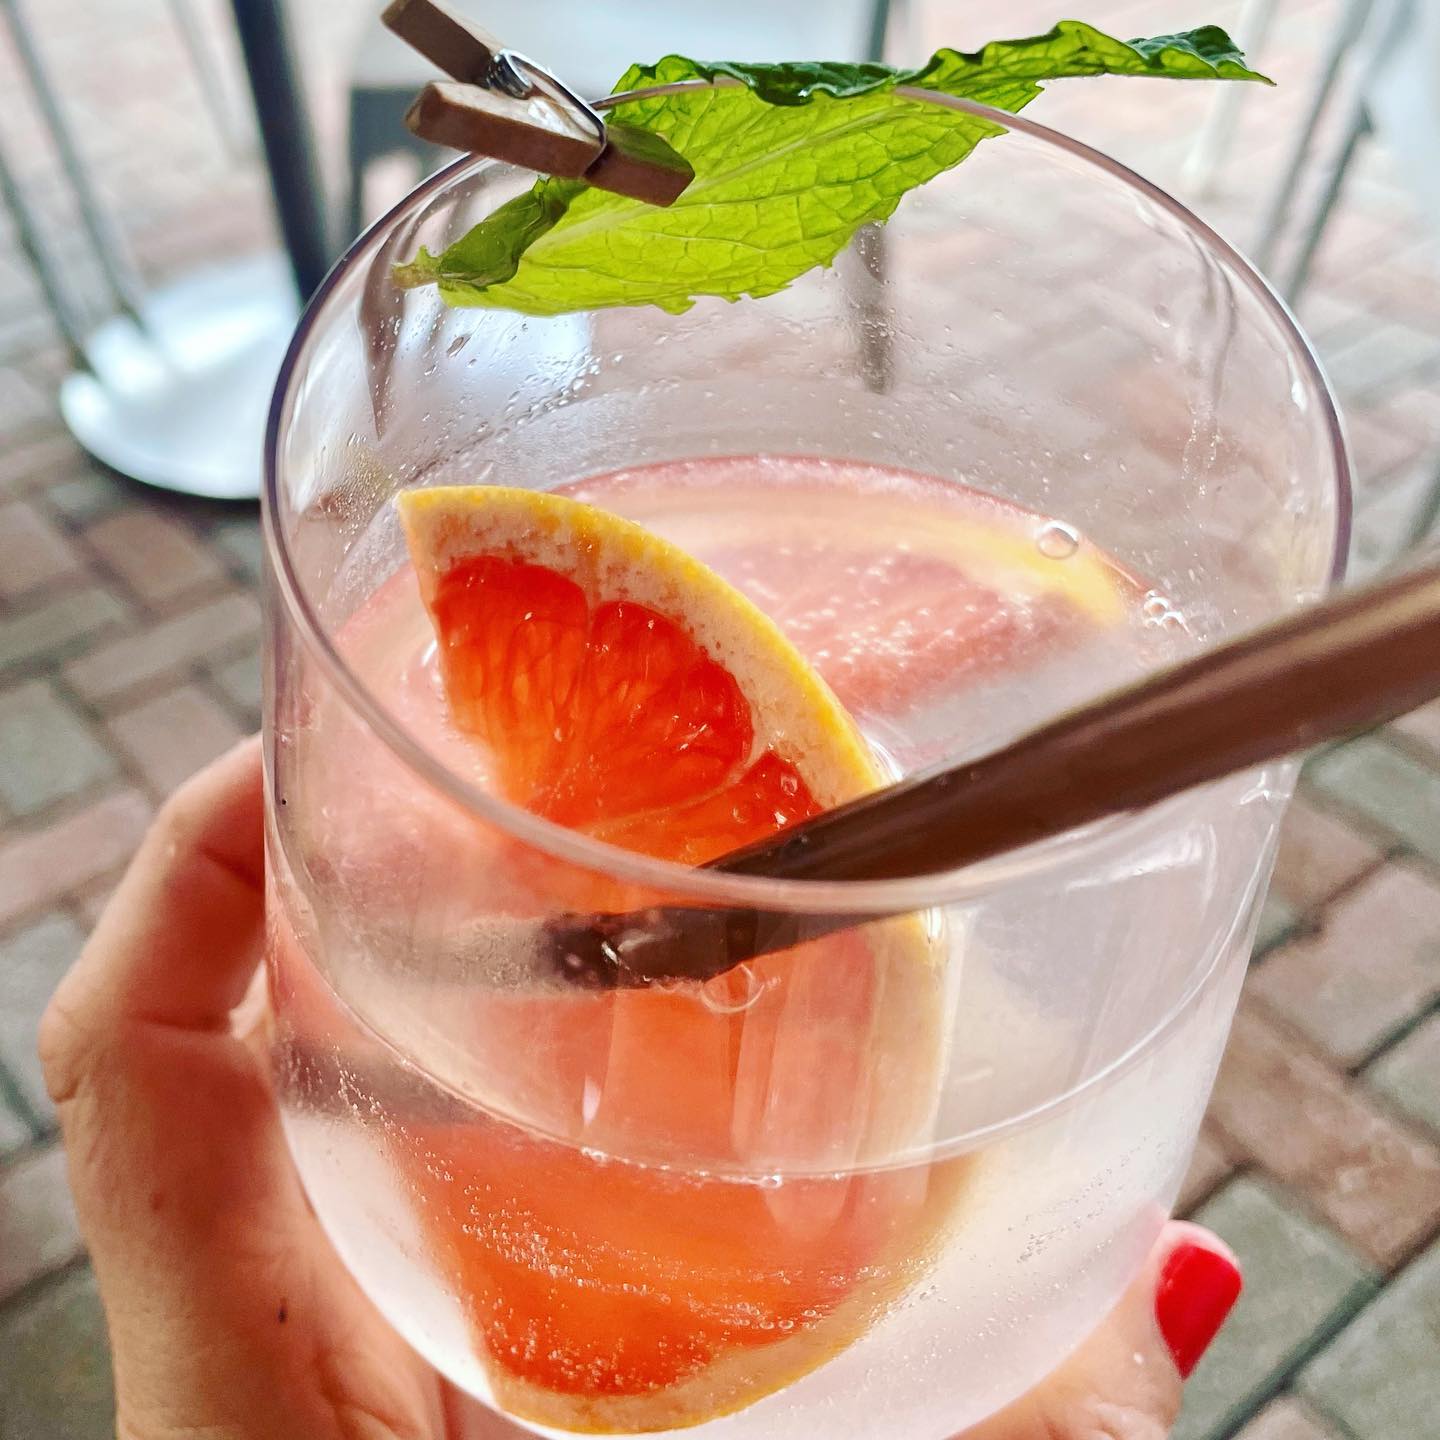 A little belated, this was a FABULOUS drink I had last week in Delray Beach, FL at @cut432steakhouse : a “Hemingway G&T” made with Malfy Rosa Gin. I never had @malfygin_us before this- it’s an Italian gin, with a bright grapefruit flavor. Aromas of rhubarb, anise, grapefruit…  a delicious, refreshing summer cocktail. It went down very smoothly, right before the most perfect petite filet mignon.  This is going to be my summer of 2022 cocktail.